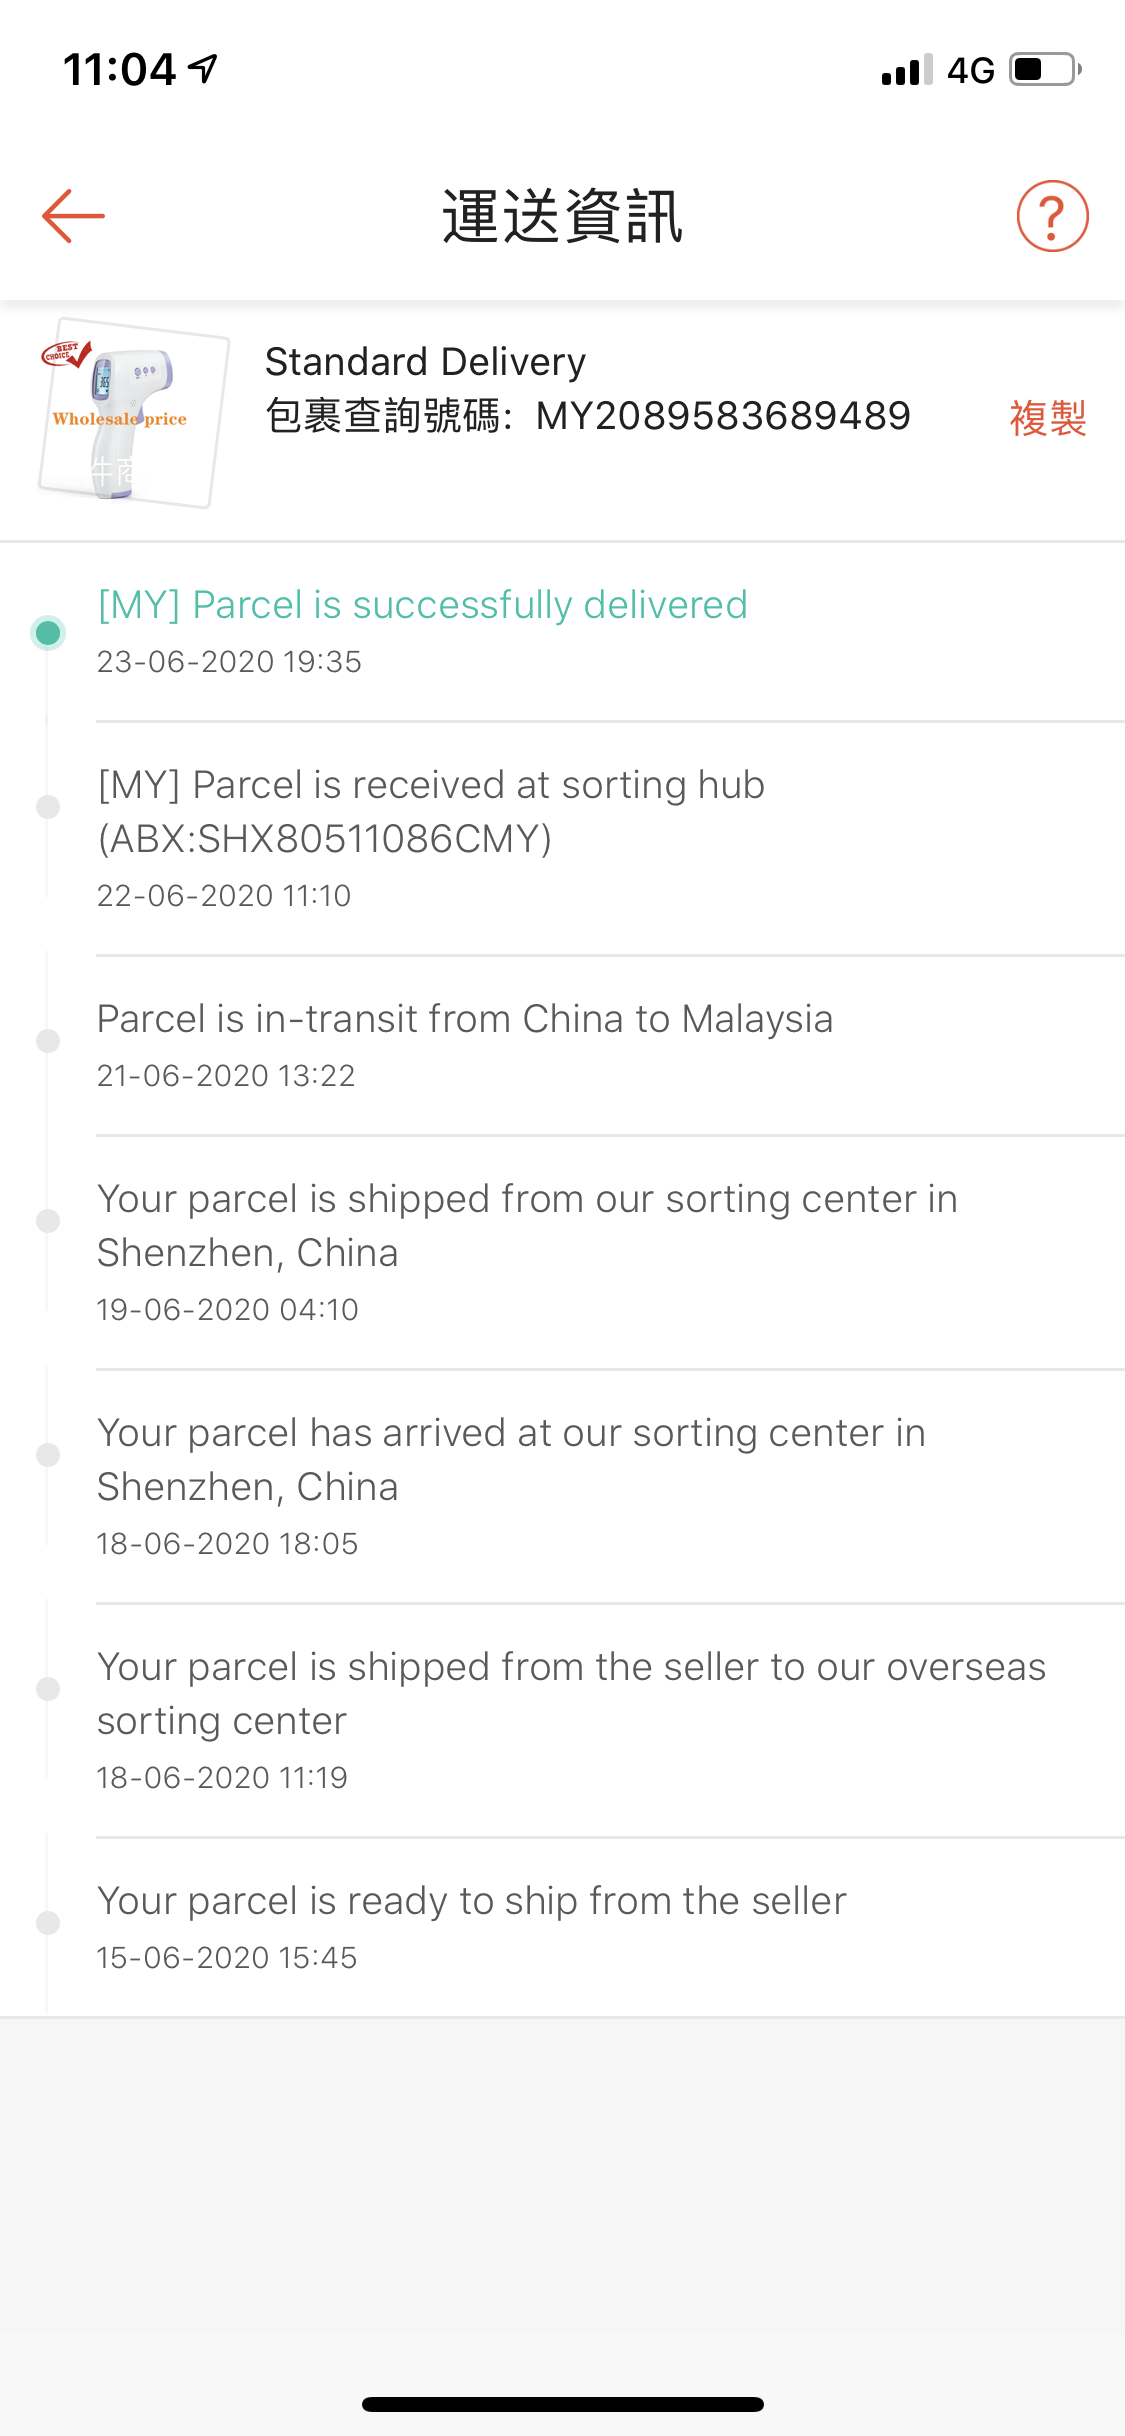 China malaysia to is parcel transit from in What Does